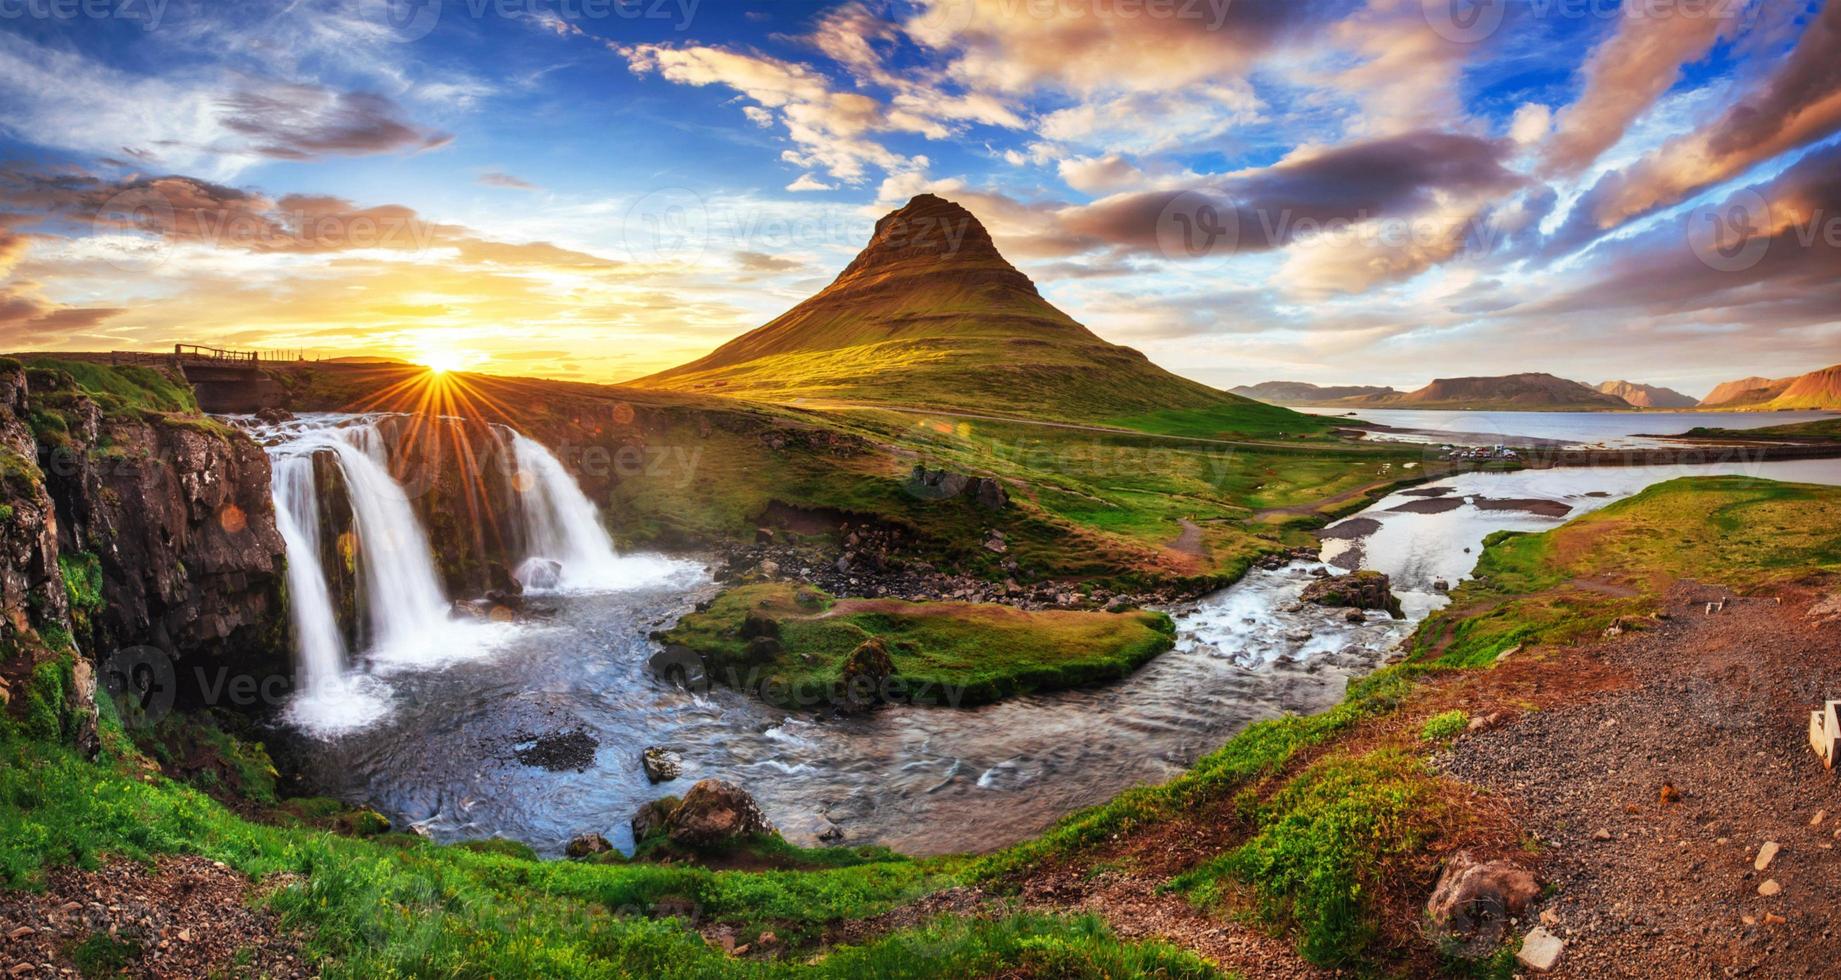 The picturesque sunset over landscapes and waterfalls. Kirkjufel photo